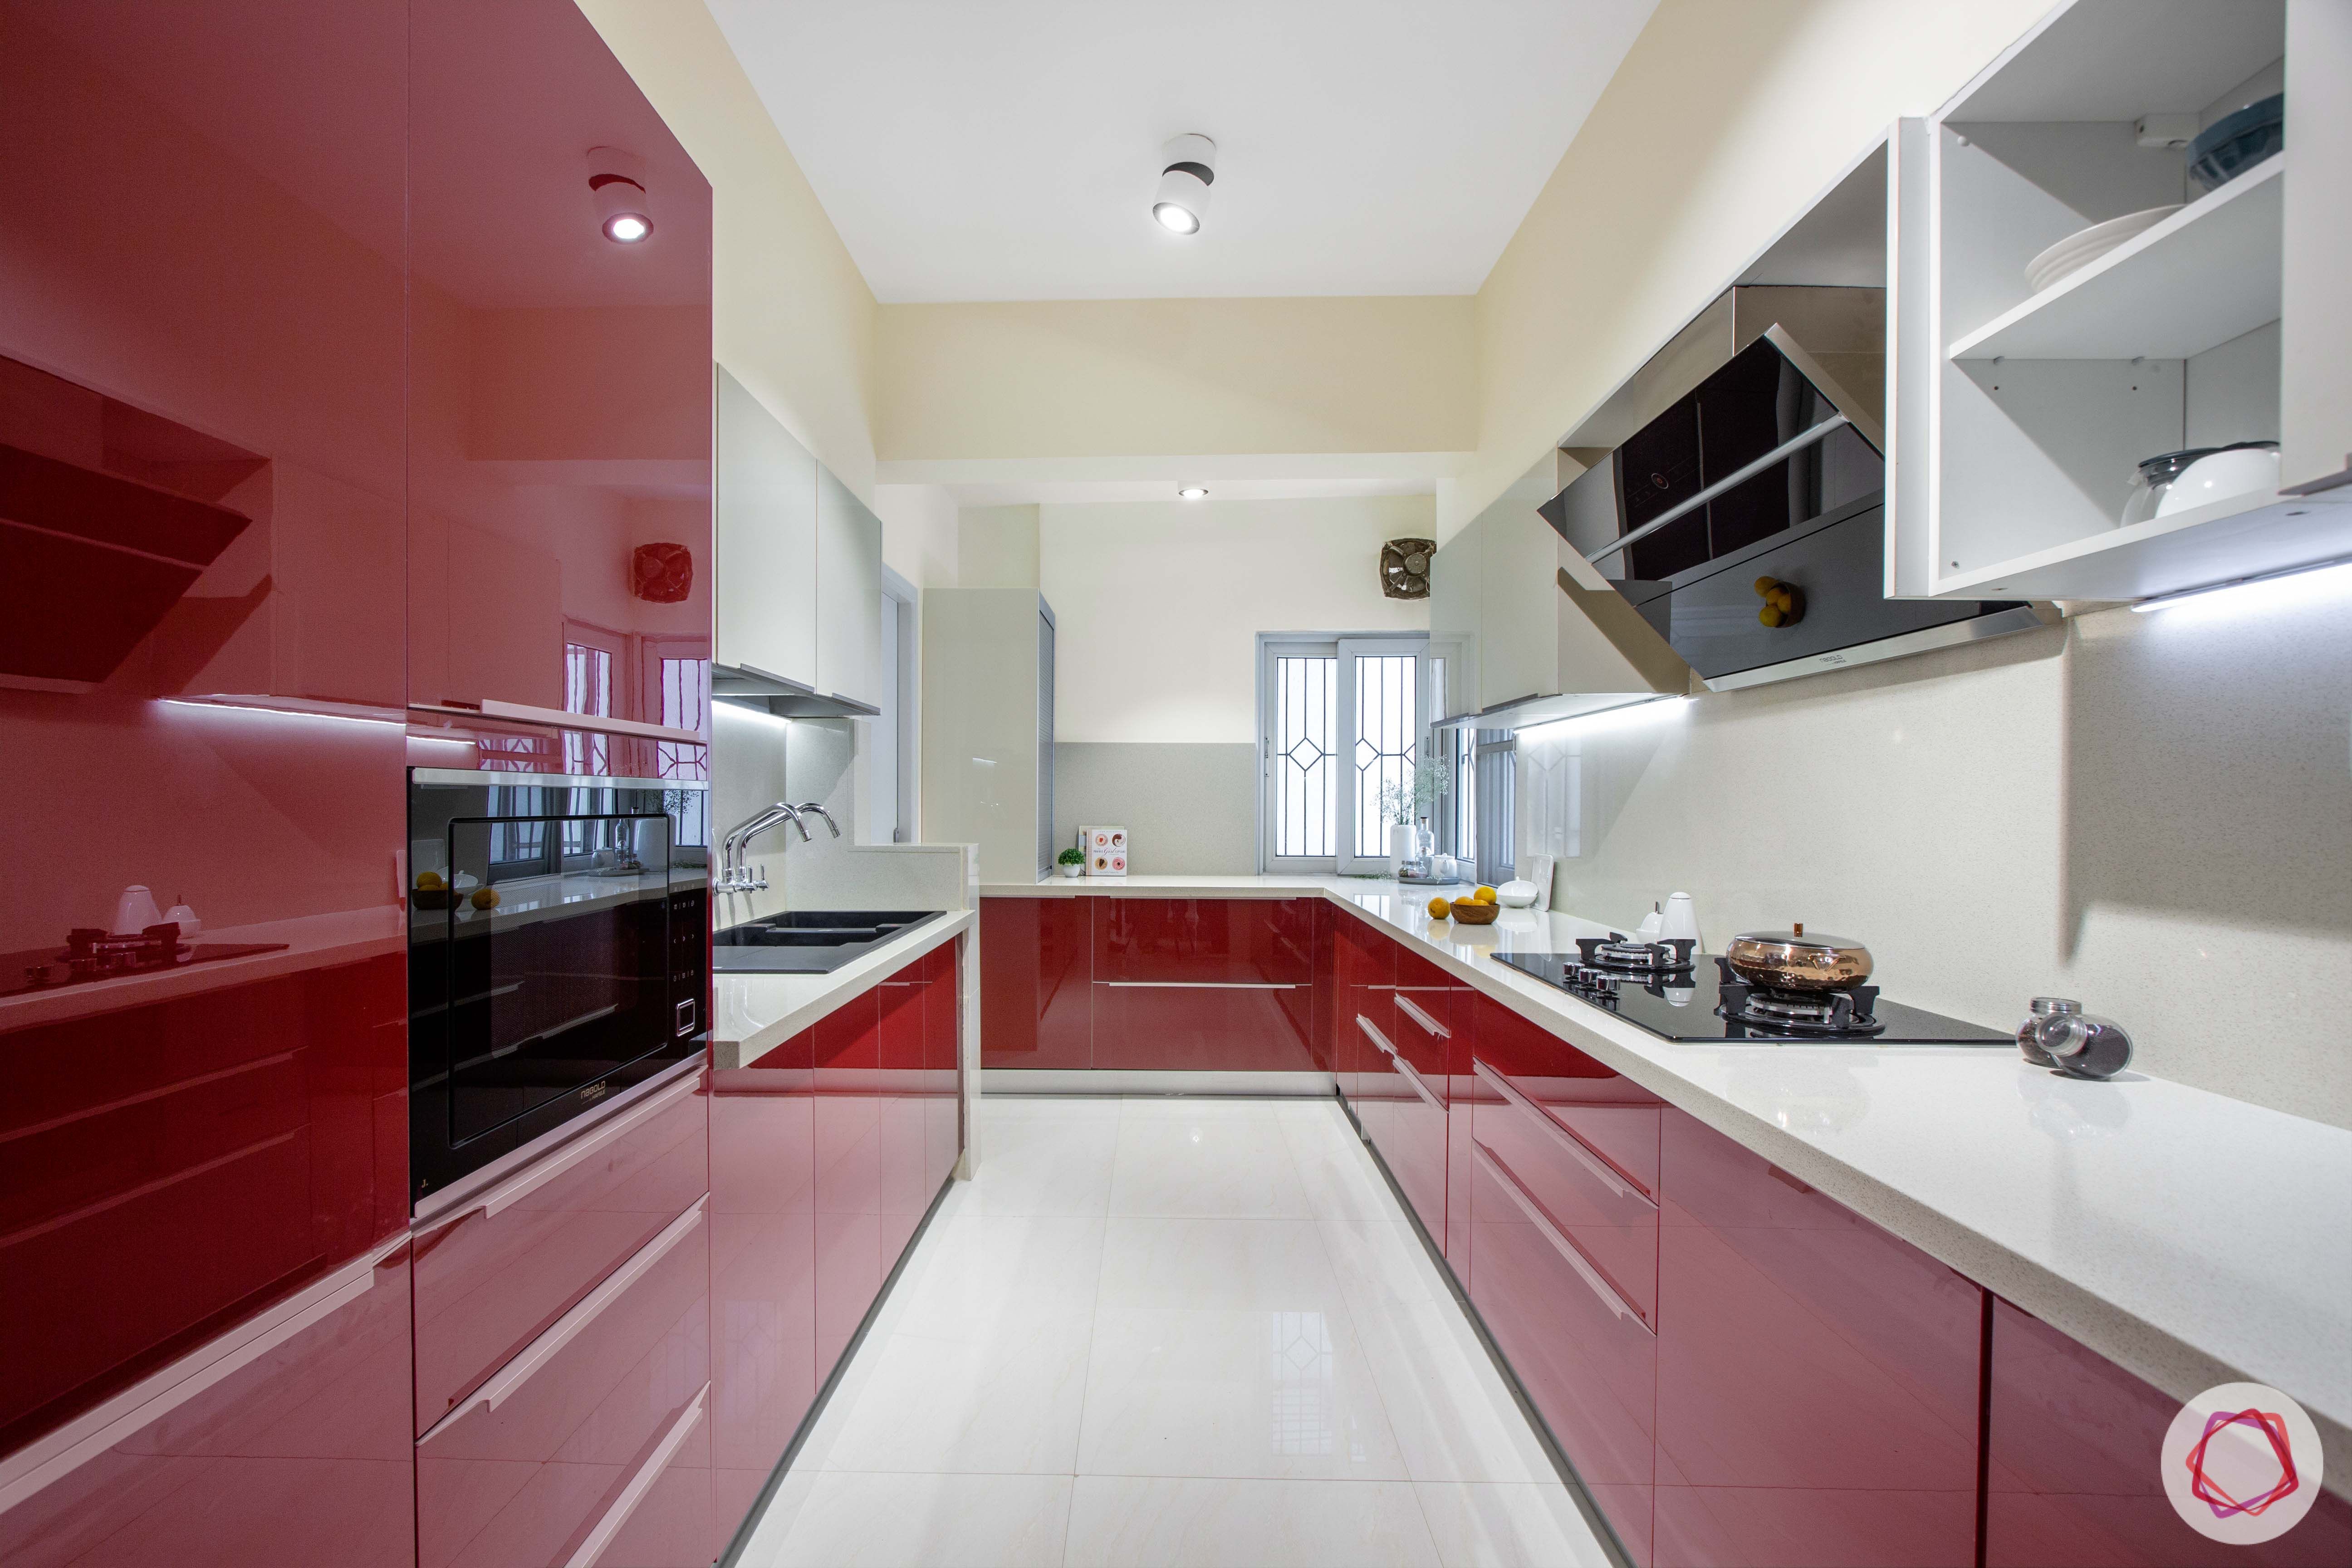 modular-kitchen-design-images-parallel-kitchen-red-and-white-tall-unit